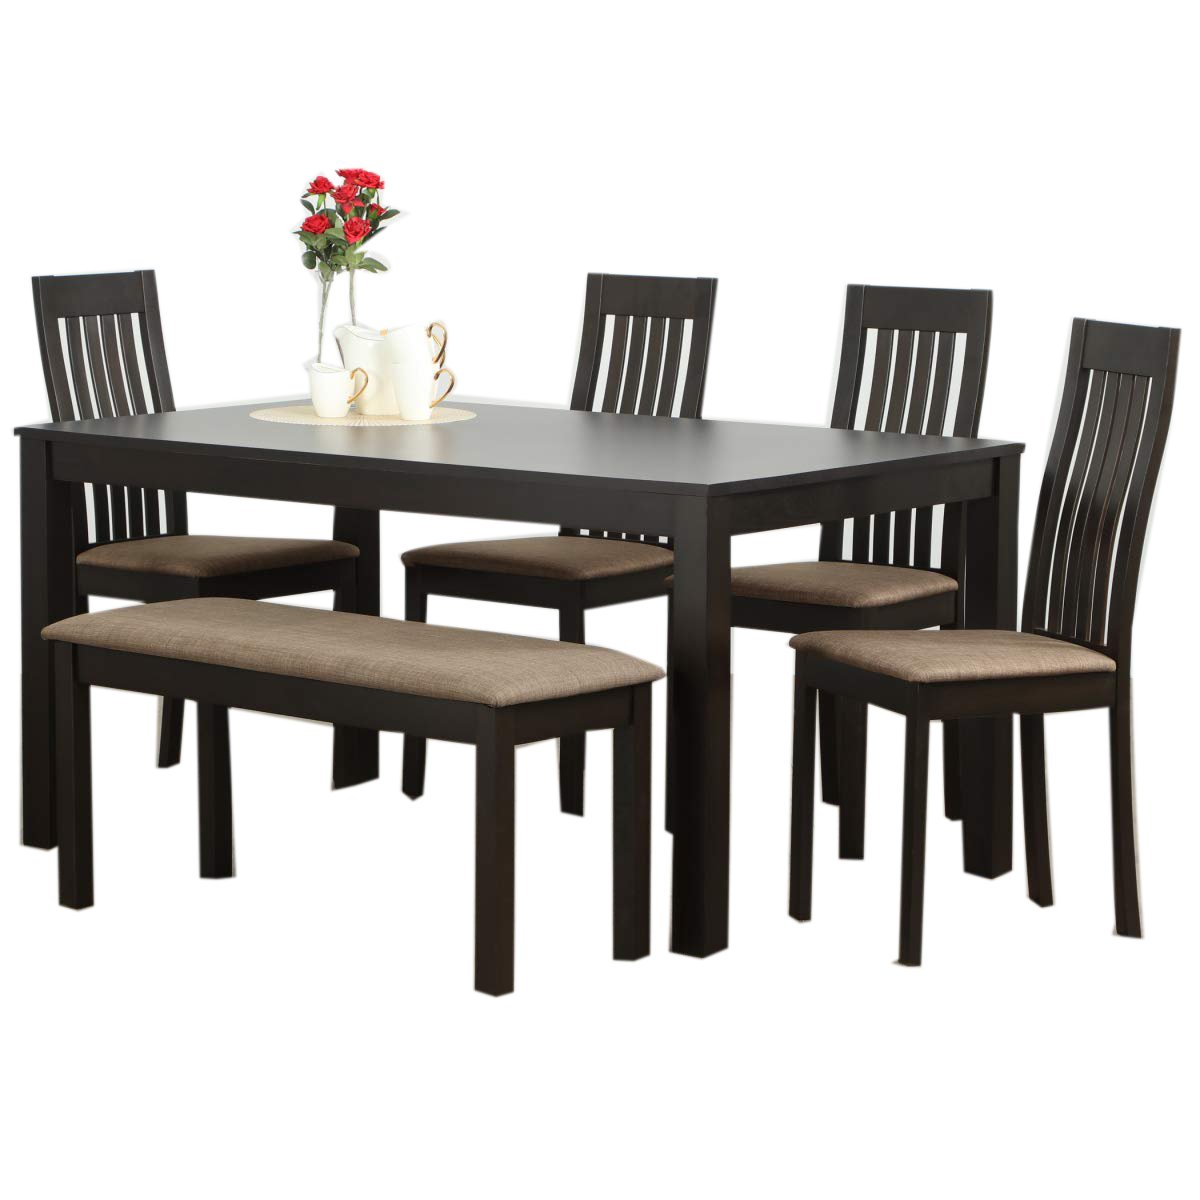 Marshall 6 Seater Dining Table with 4 Chairs and 1 Bench (Beige Walnut Finish) - Torque India